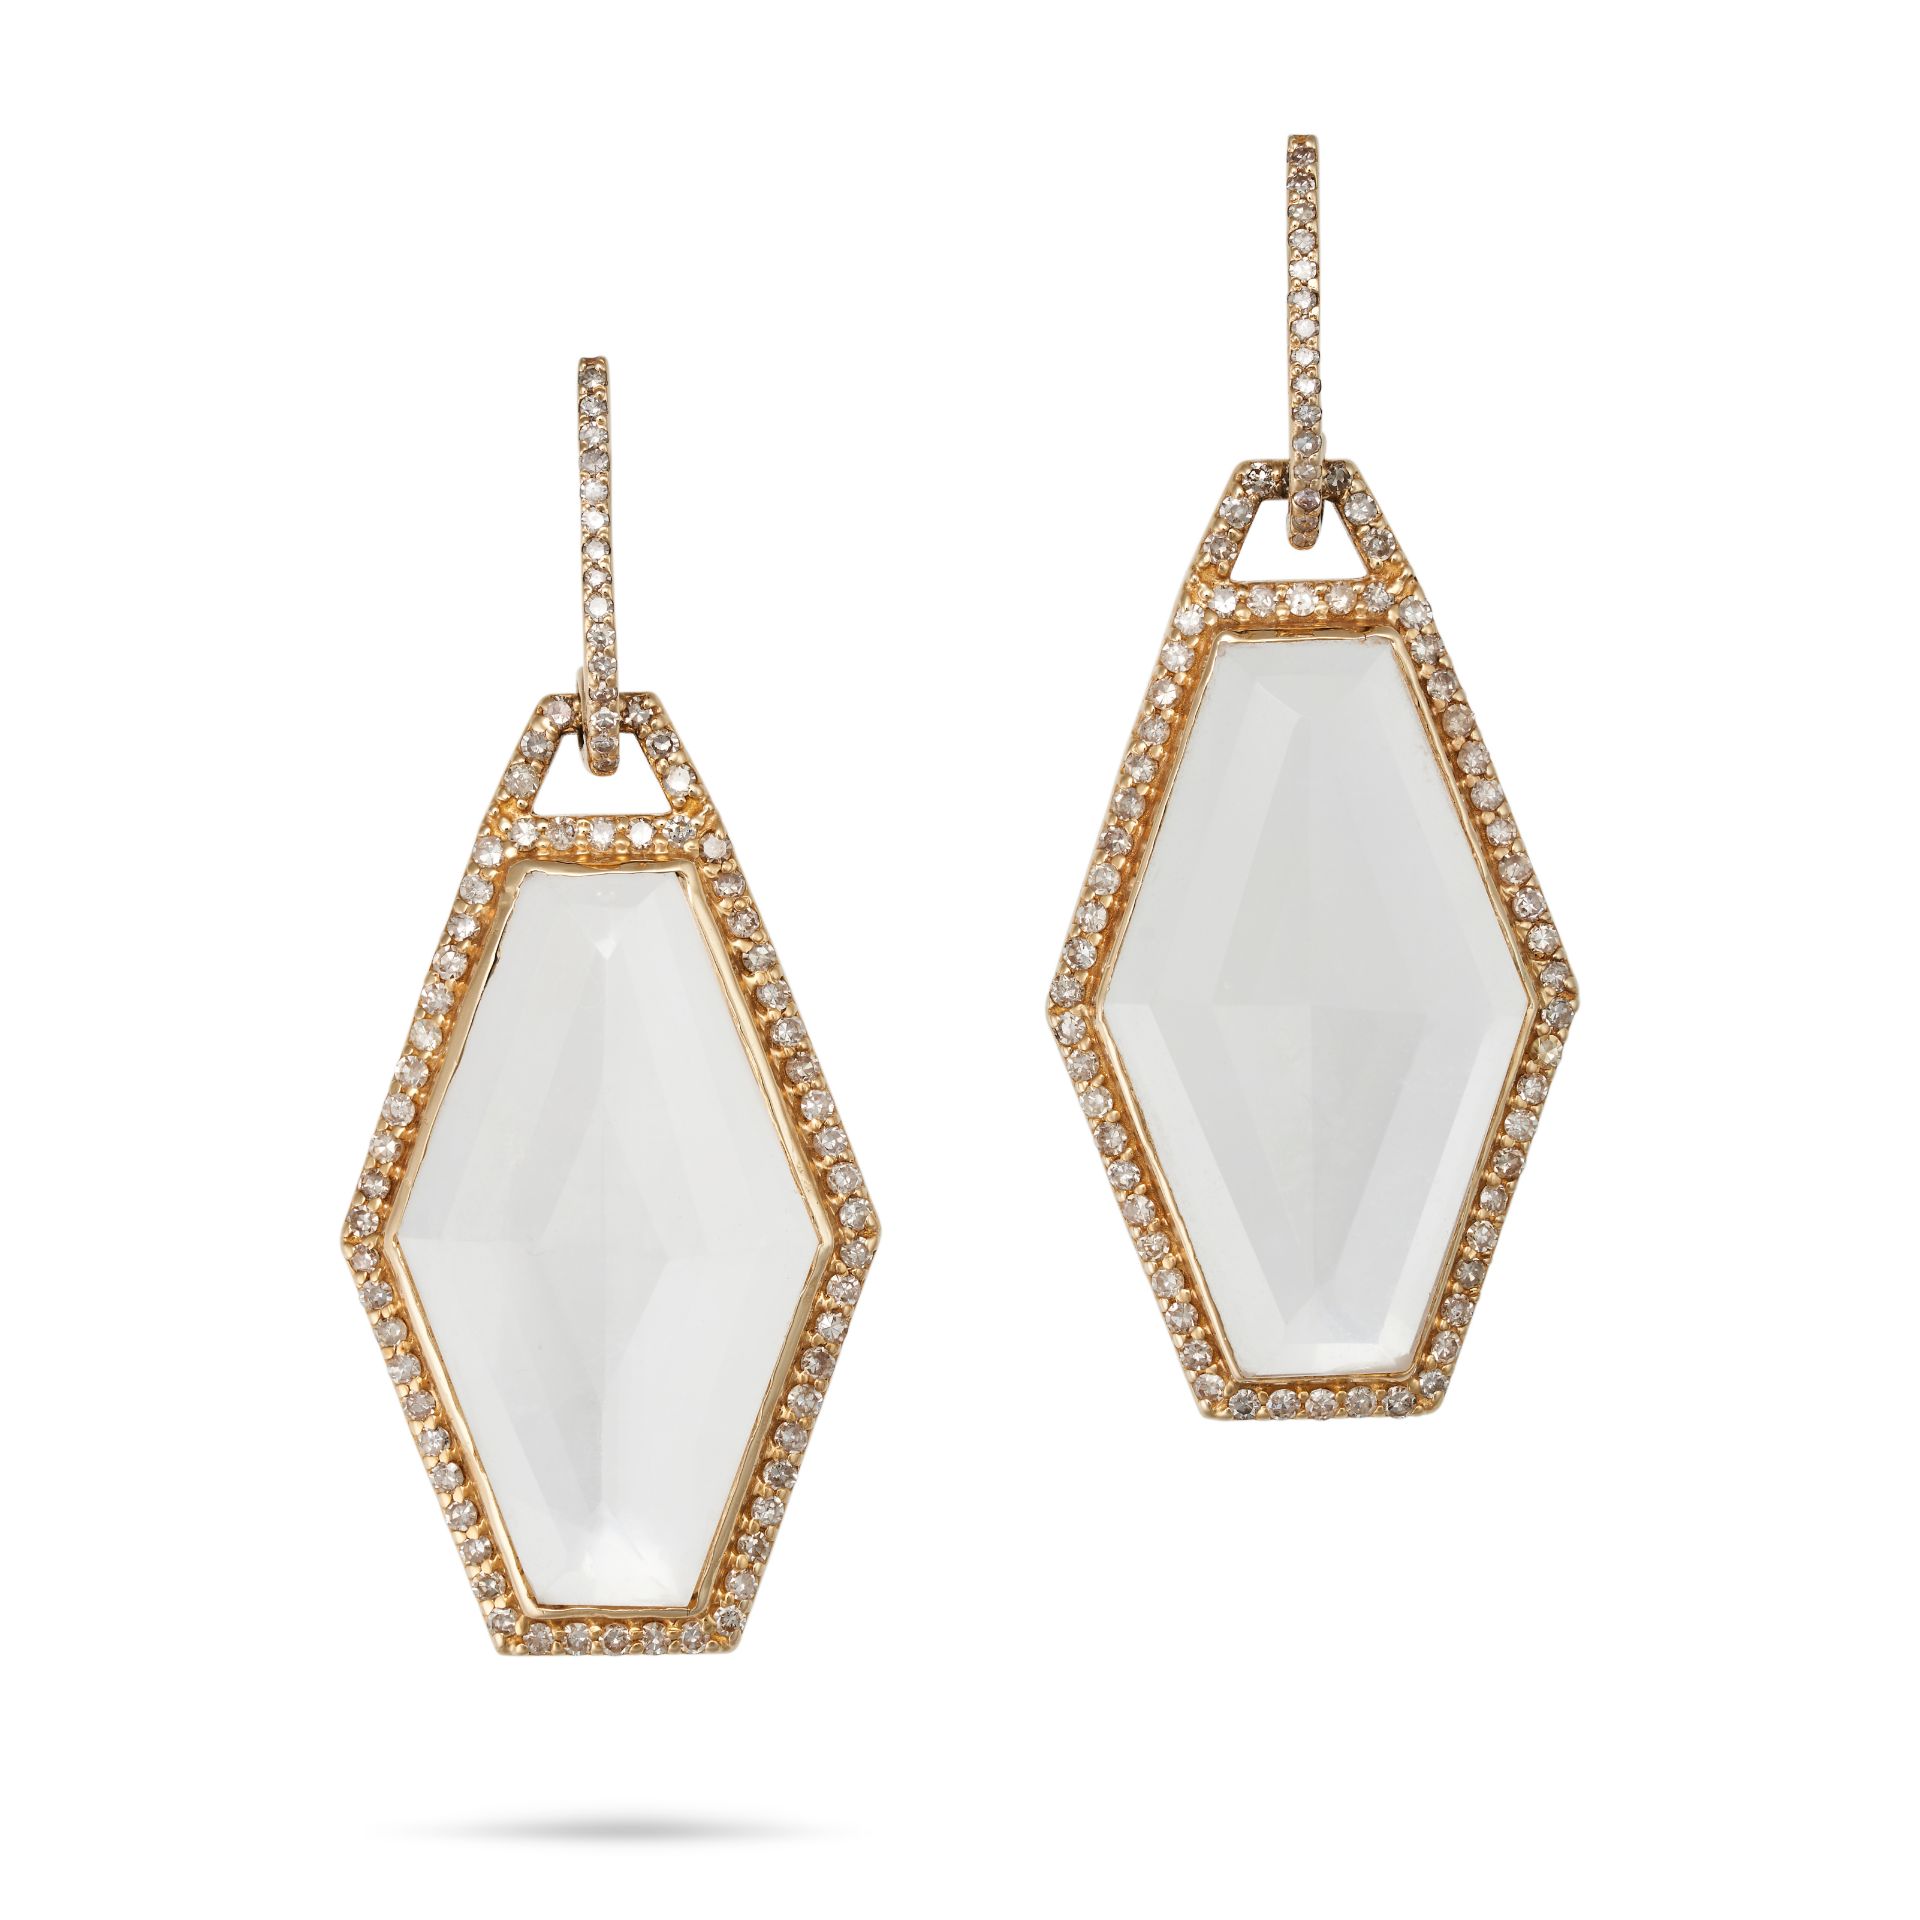 A PAIR OF ROCK CRYSTAL AND DIAMOND DROP EARRINGS each set with a faceted hexagonal piece of rock ...